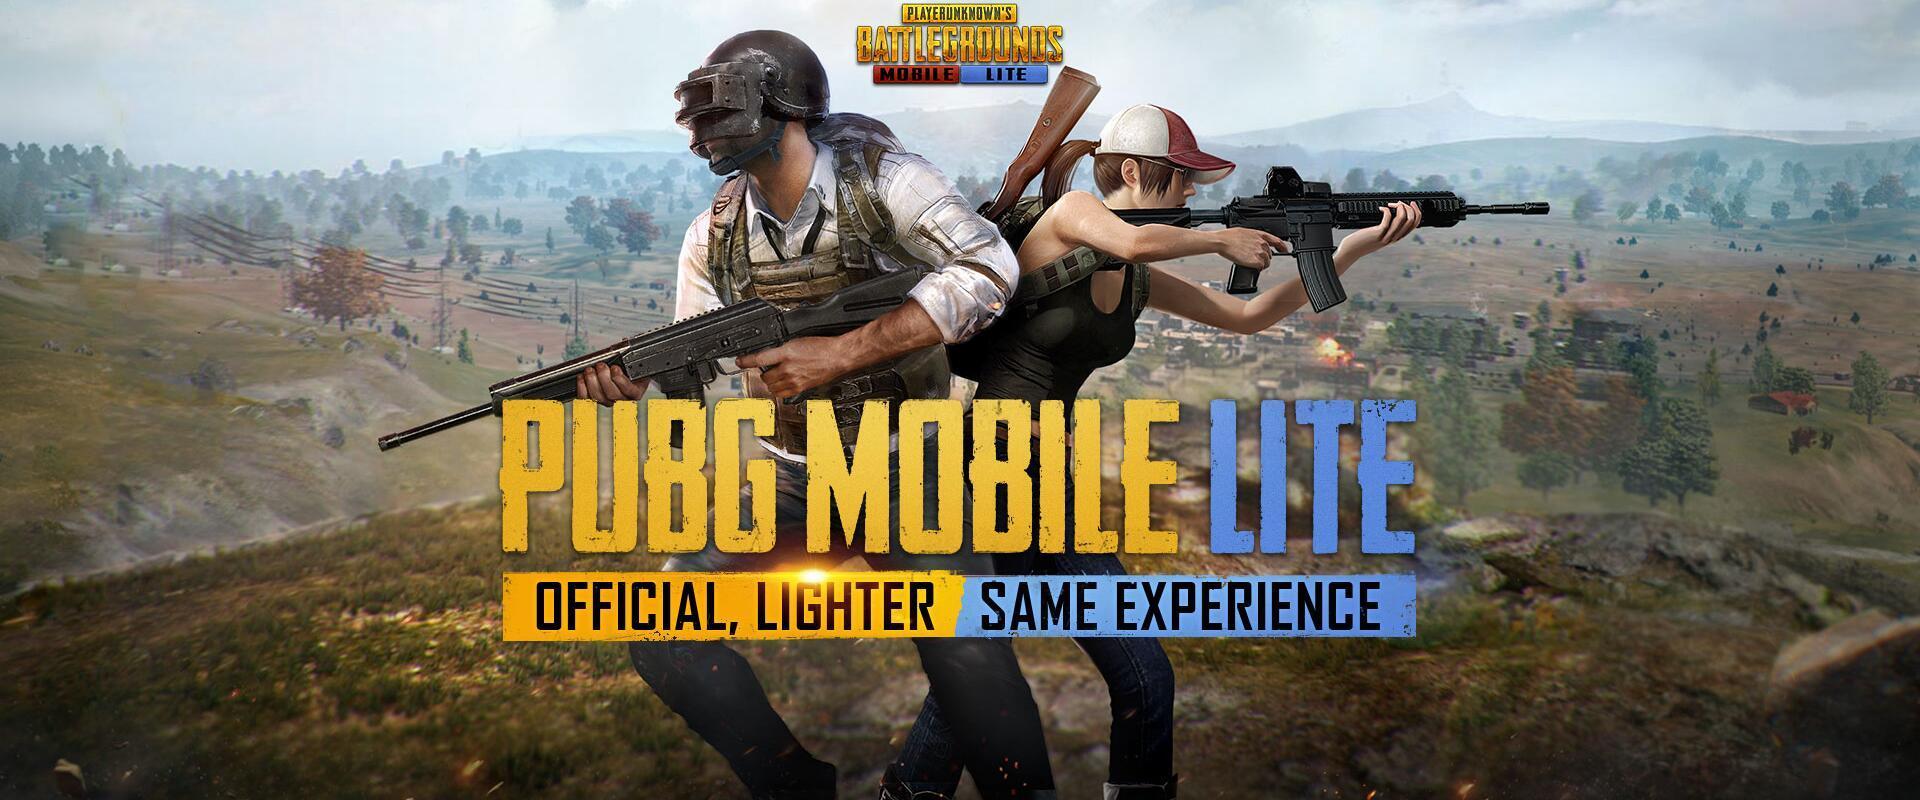 Download pubg patch for pc adobe photoshop express for windows 7 full version free download